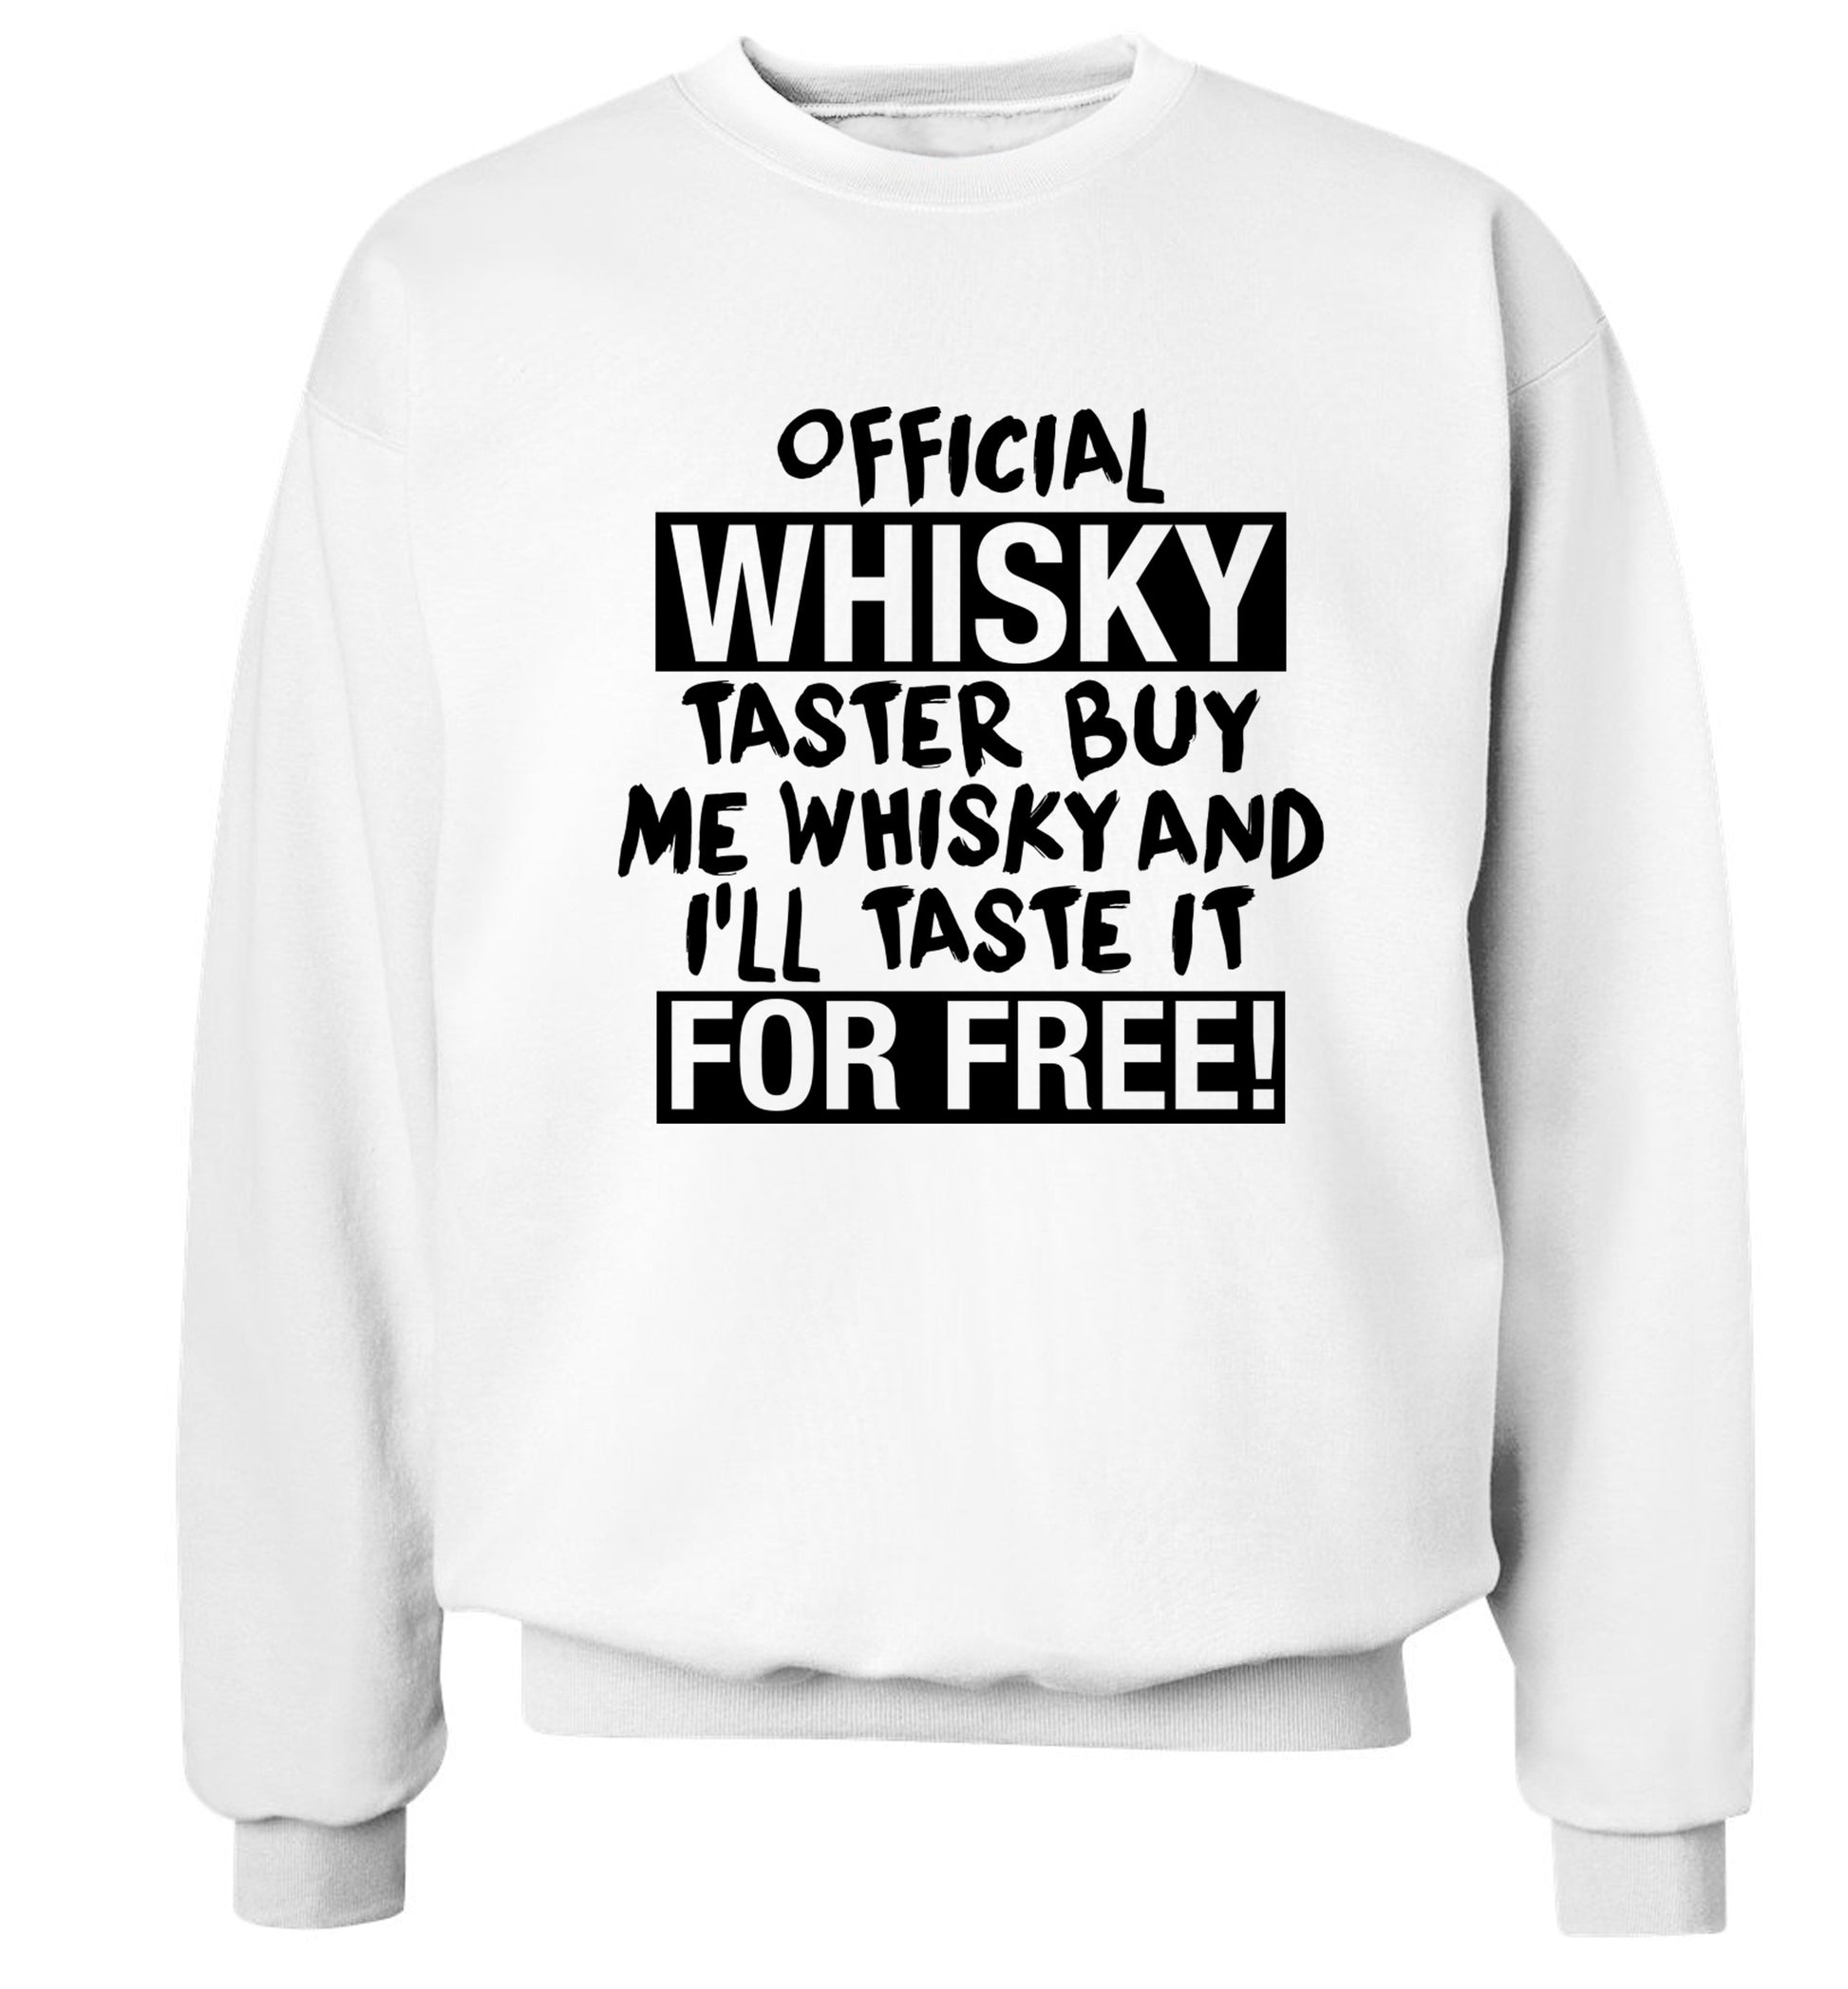 Official whisky taster buy me whisky and I'll taste it for free Adult's unisex white Sweater 2XL